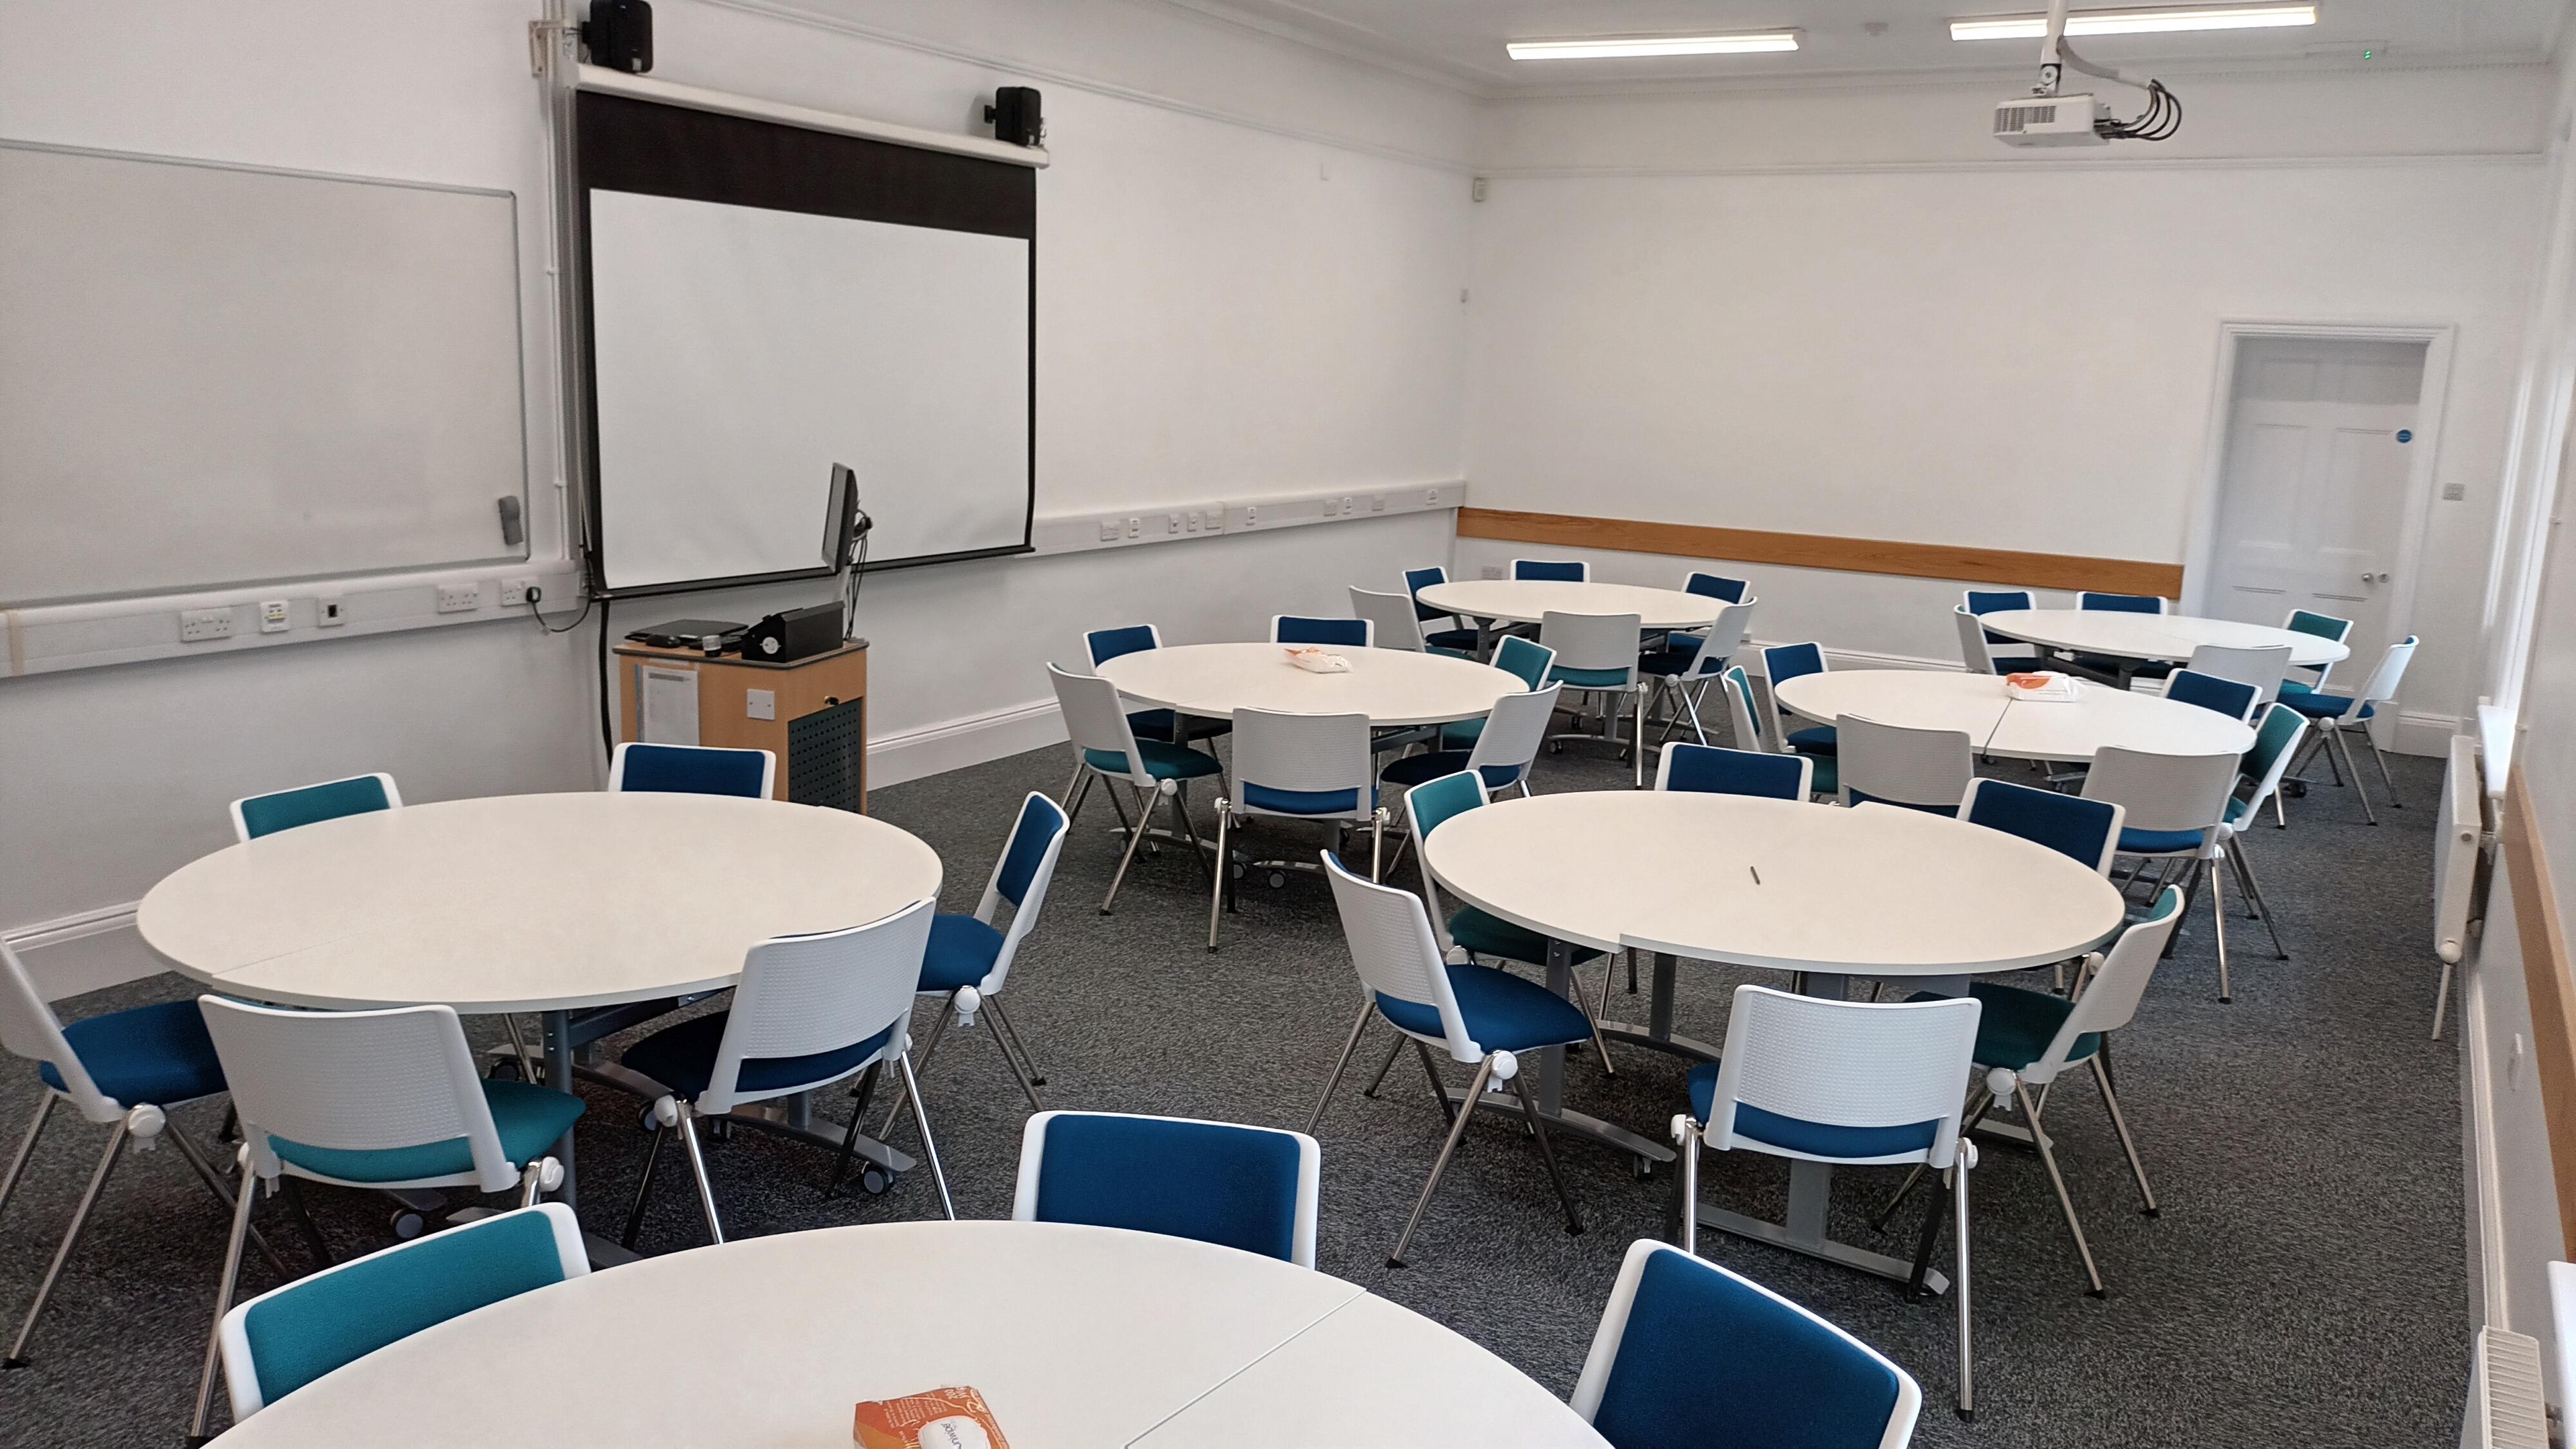 Canterbury Christ Church University, The Old Sessions House Classroom F17 photo #3